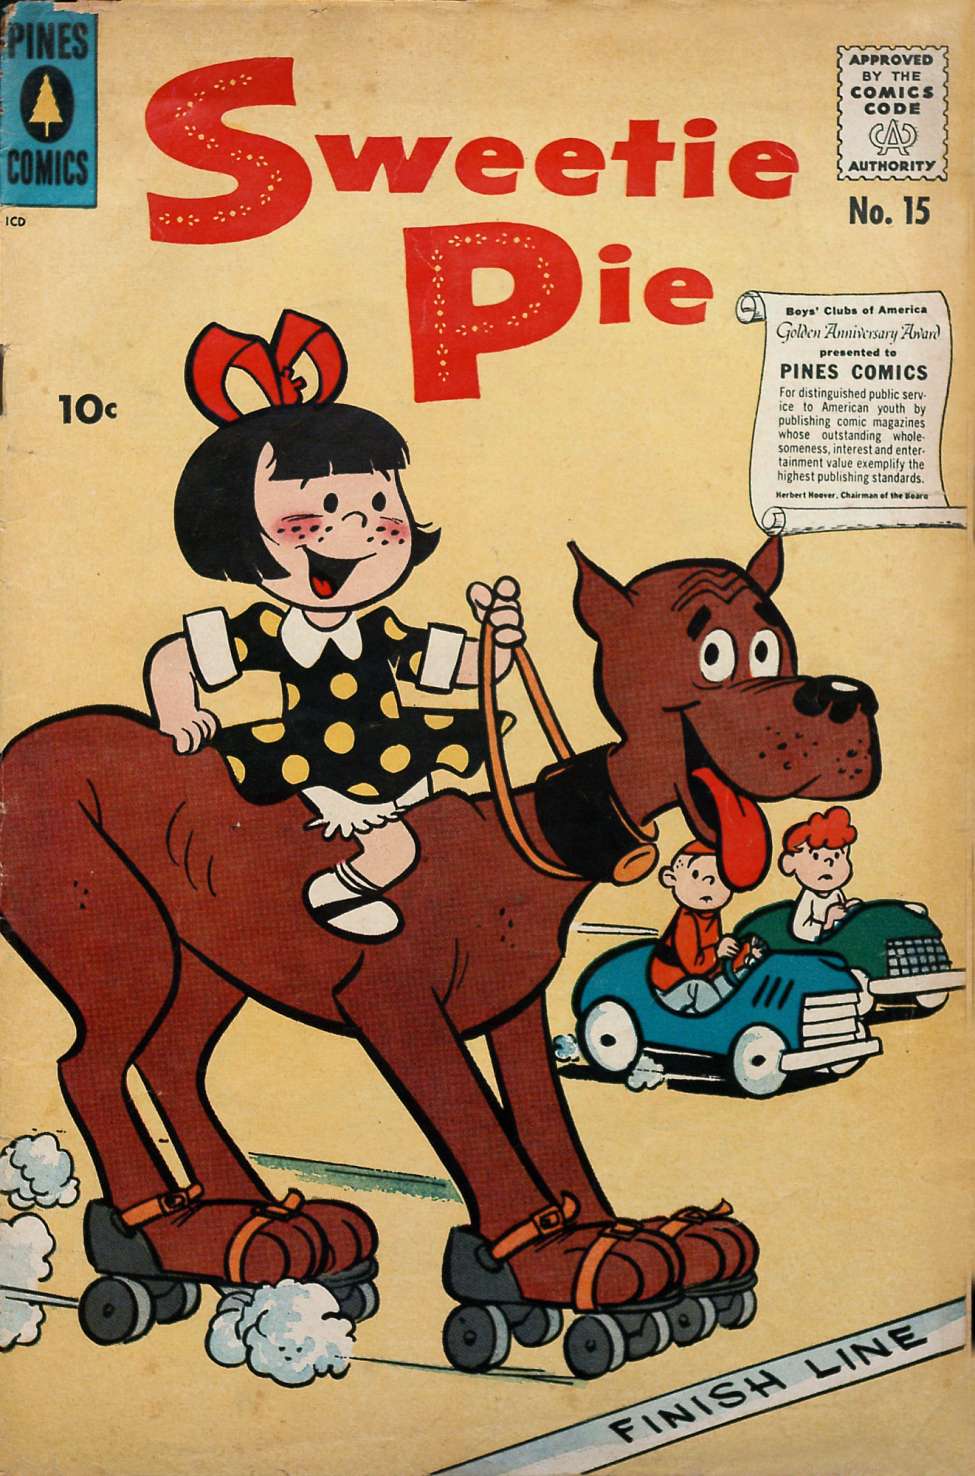 Comic Book Cover For Sweetie Pie 15 (alt) - Version 2